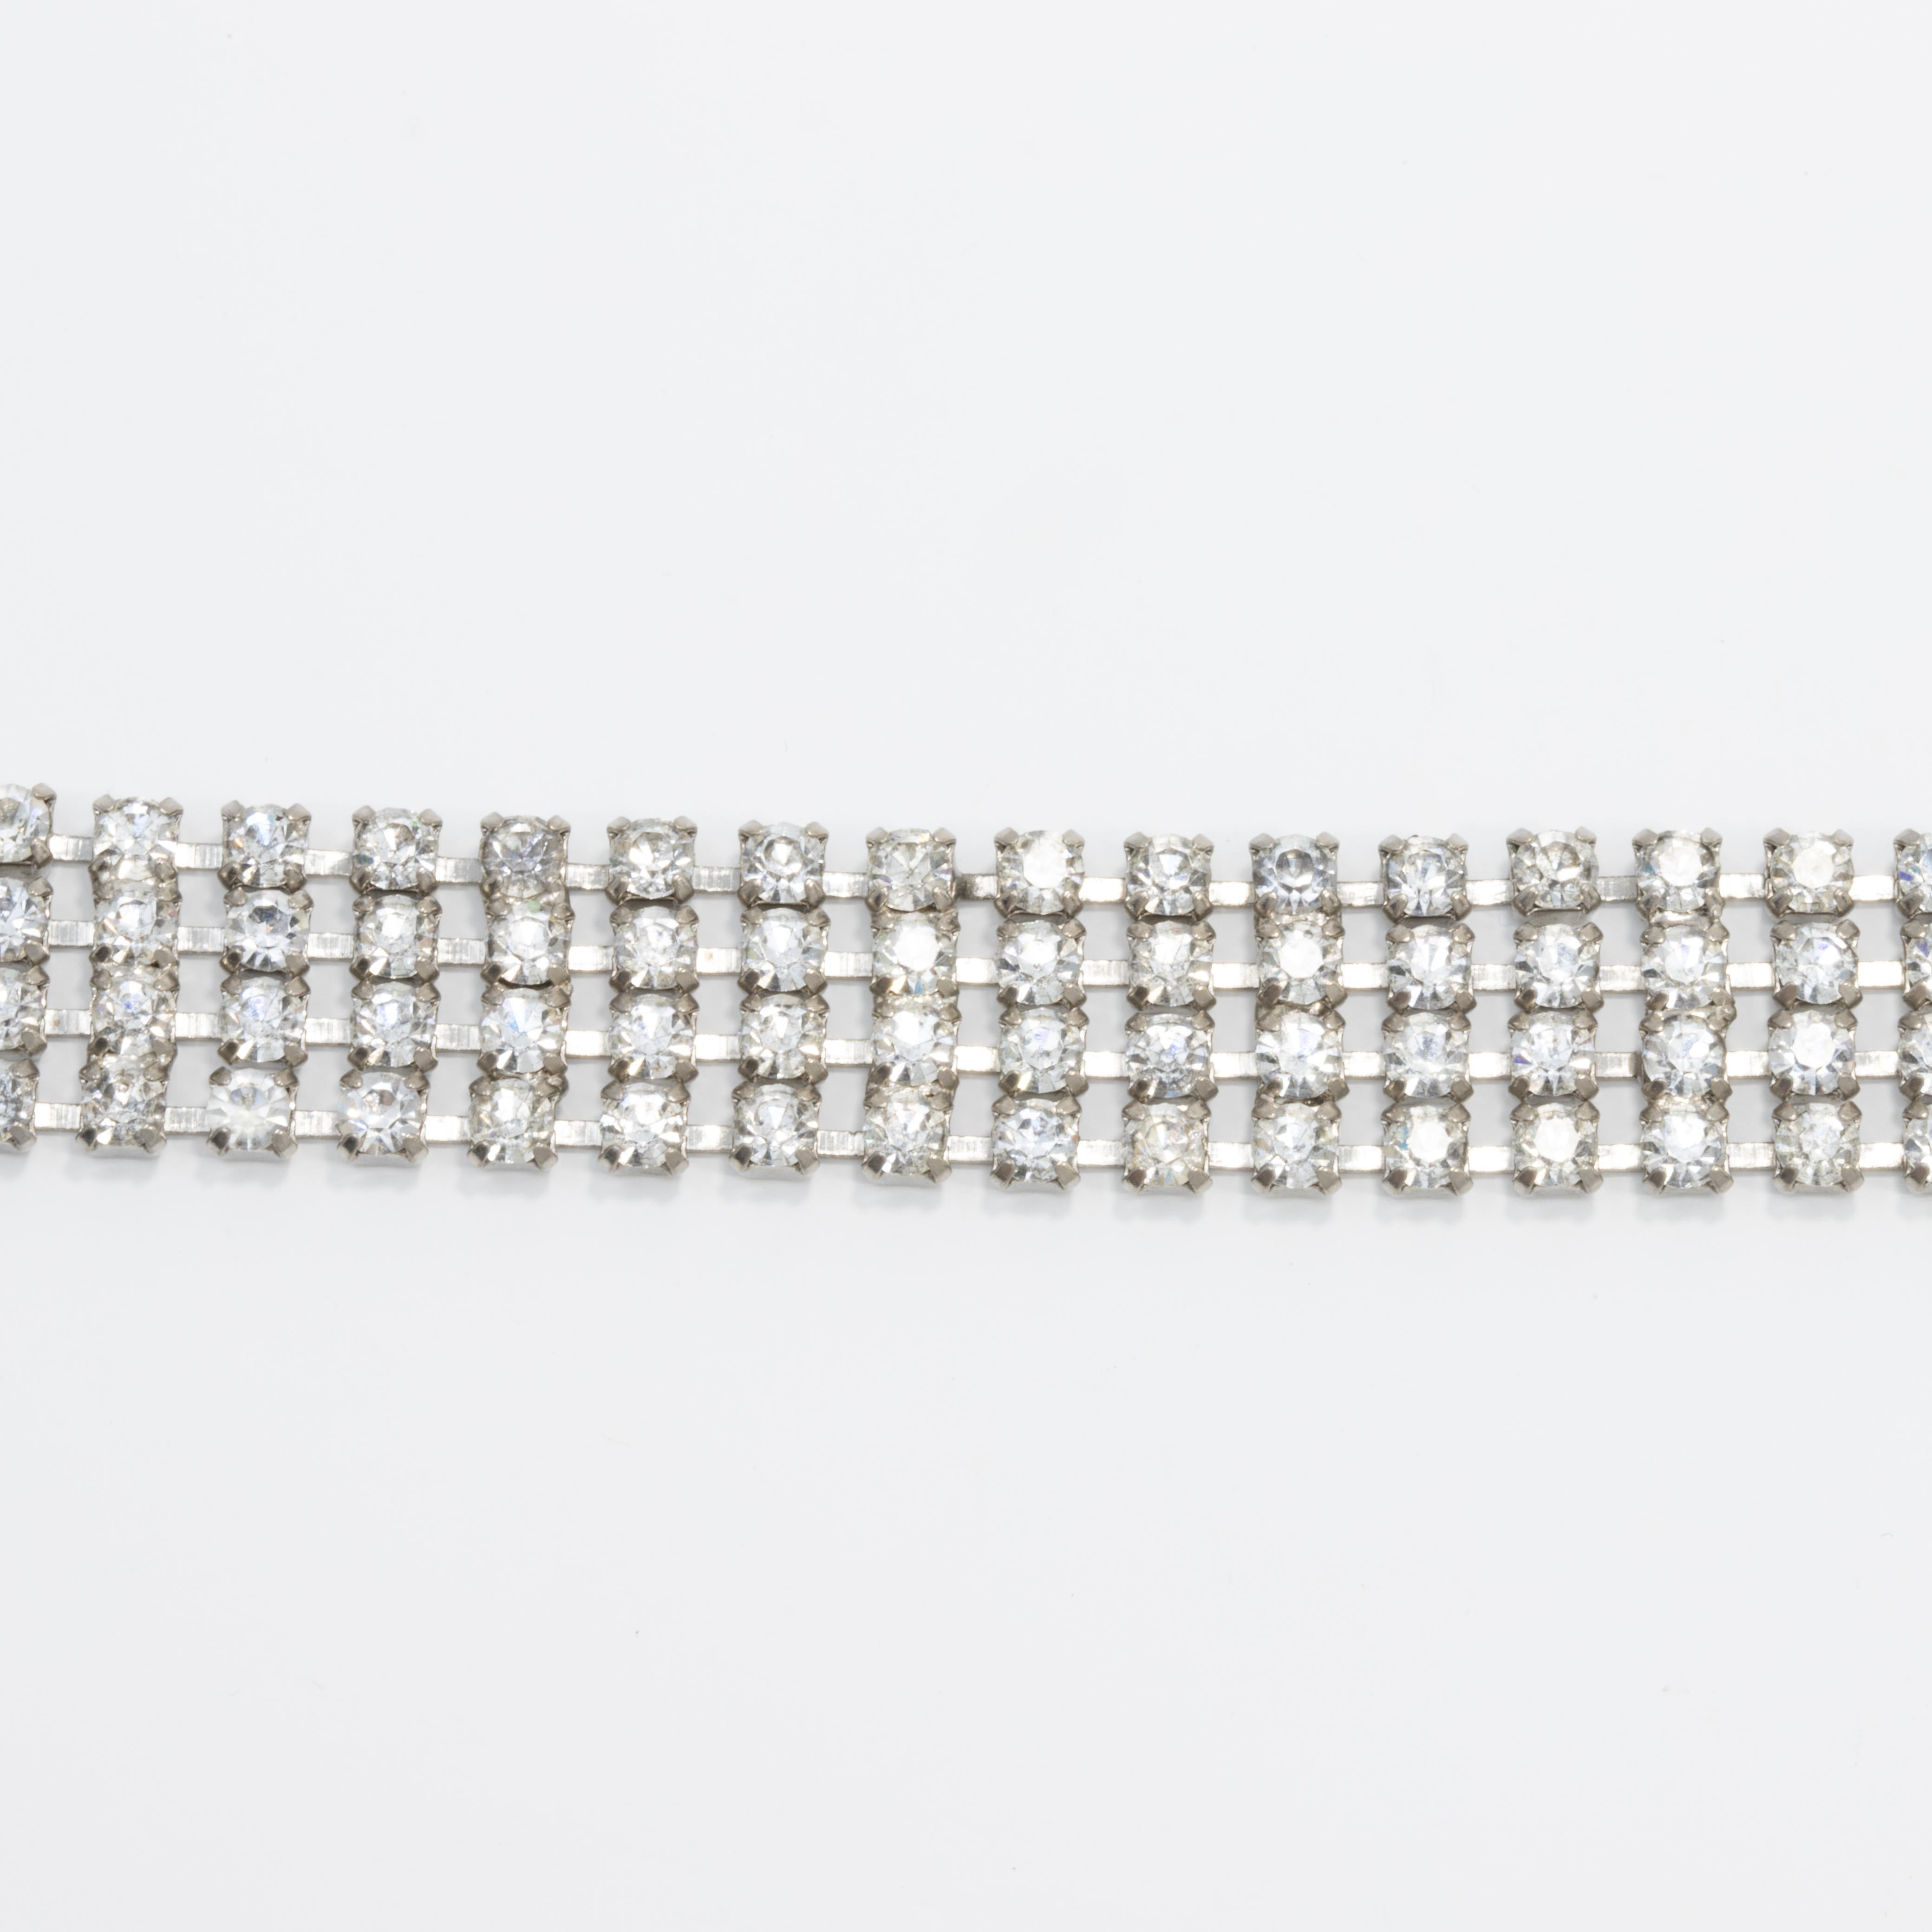 Early-1900s Art Deco bracelet featuring four rows of linked crystals, fastened with a foldover clasp.

Silver-tone.